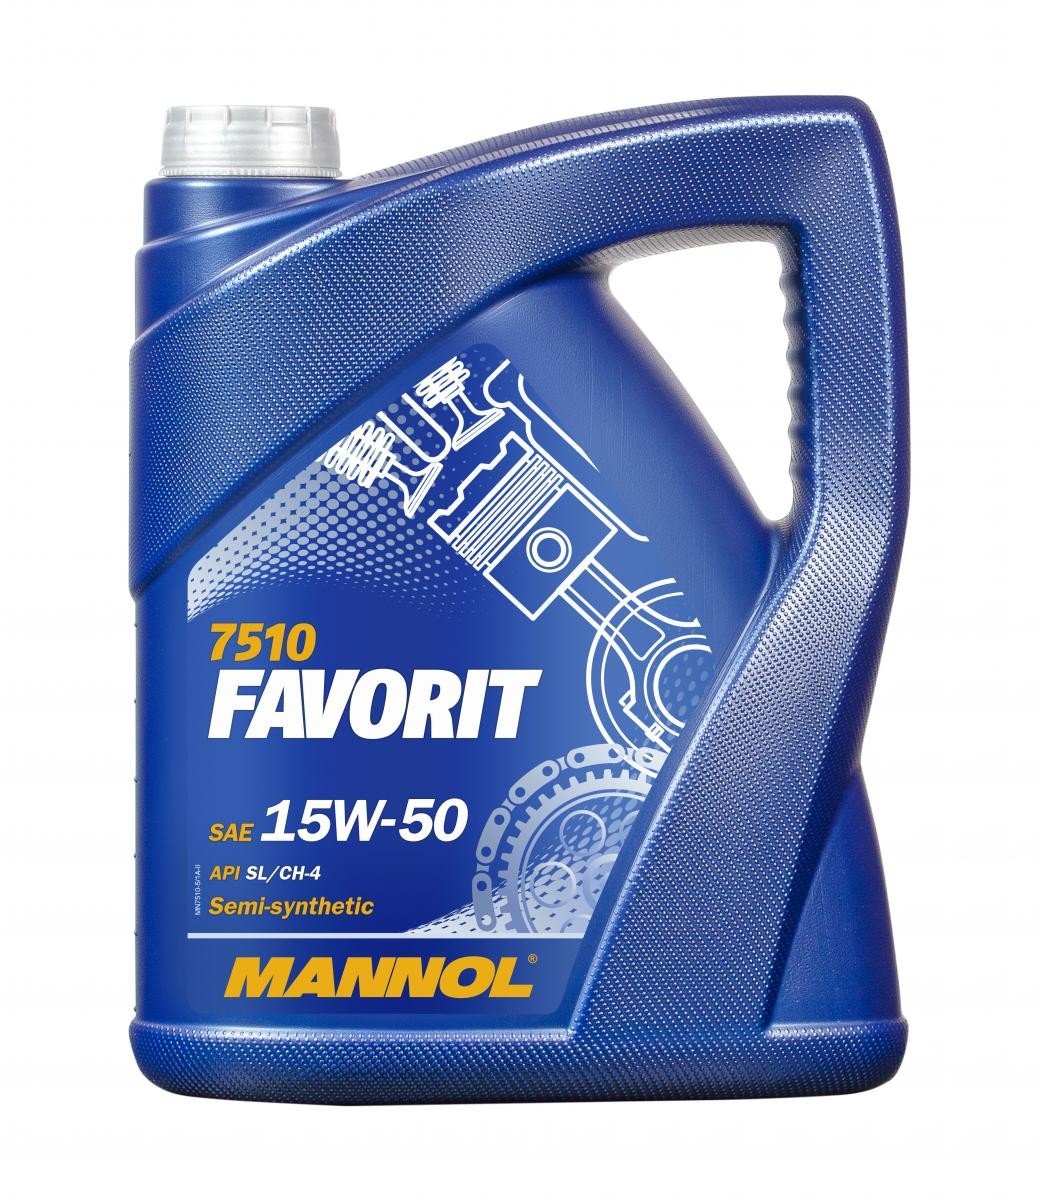 15W-50, 5l, Part Synthetic Oil from MANNOL - MN7510-5